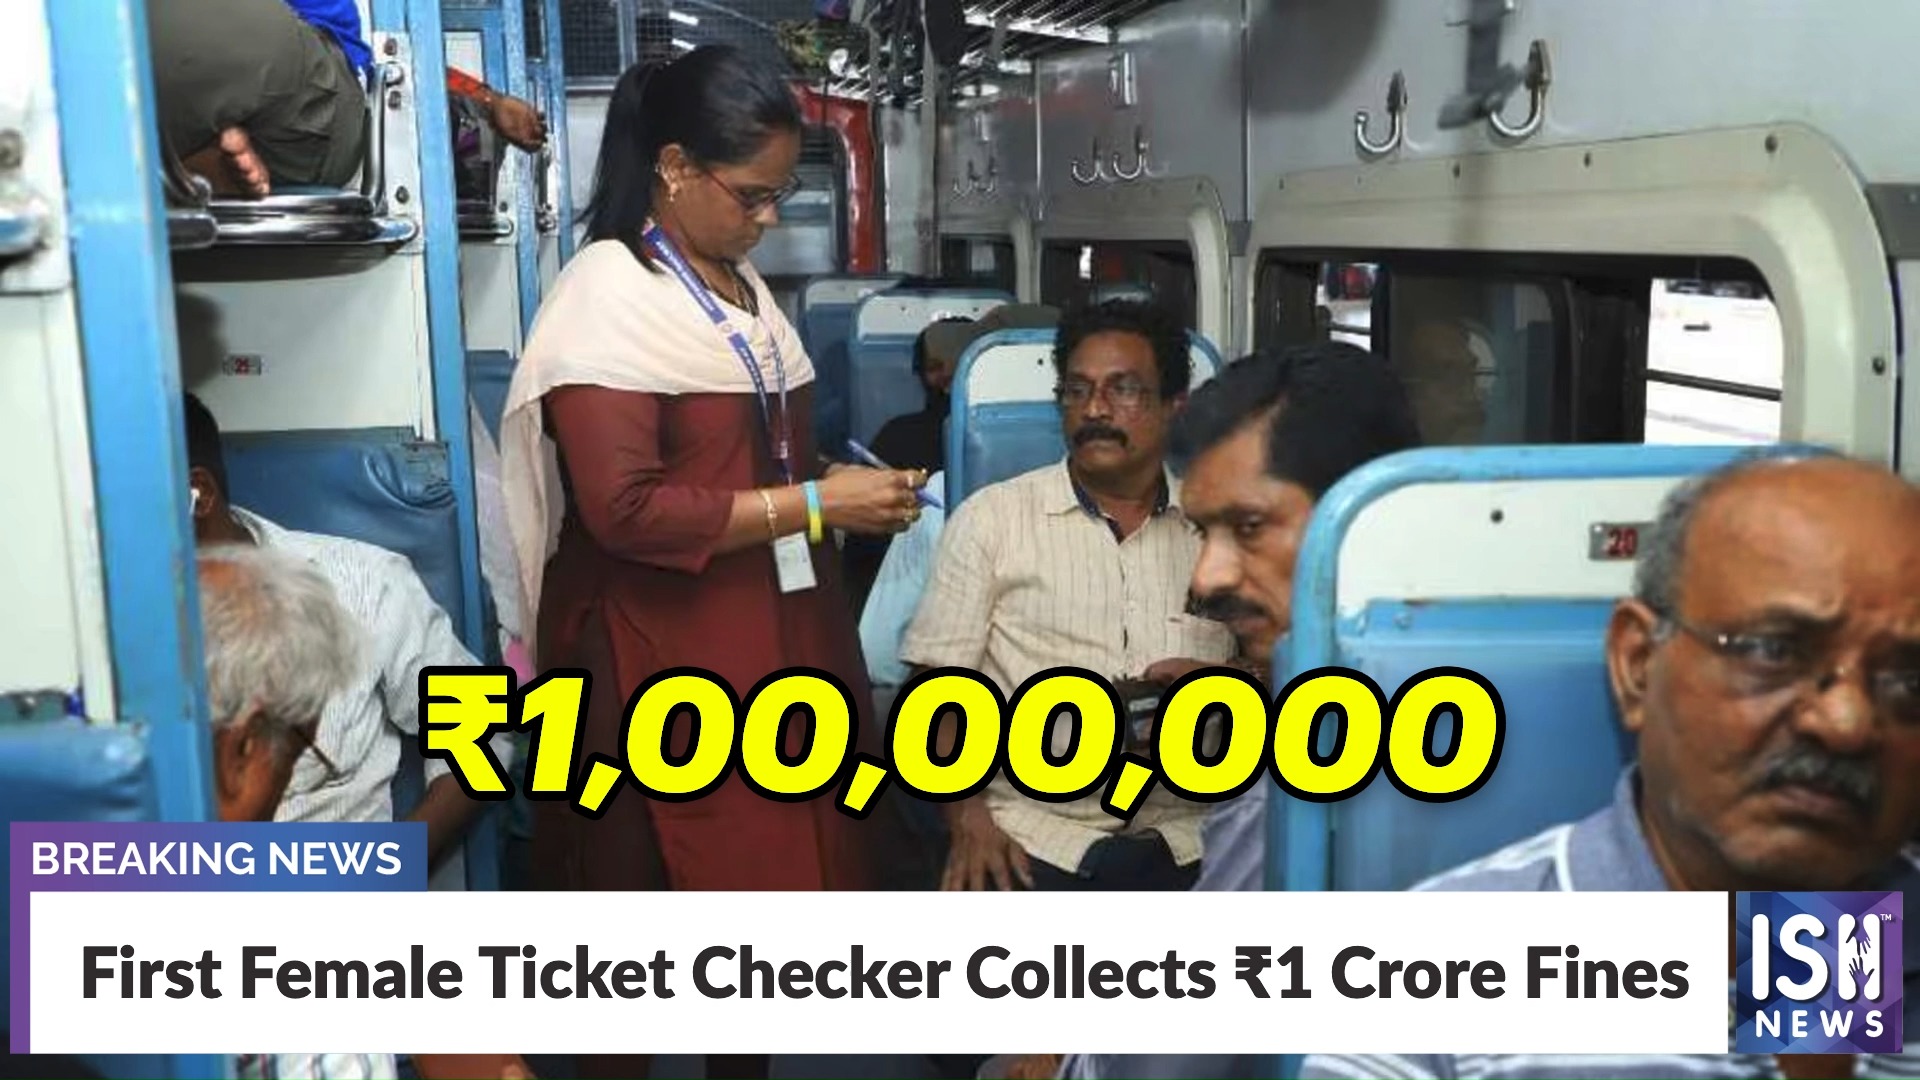 First Female Ticket Checker Collects 1 Crore Fines